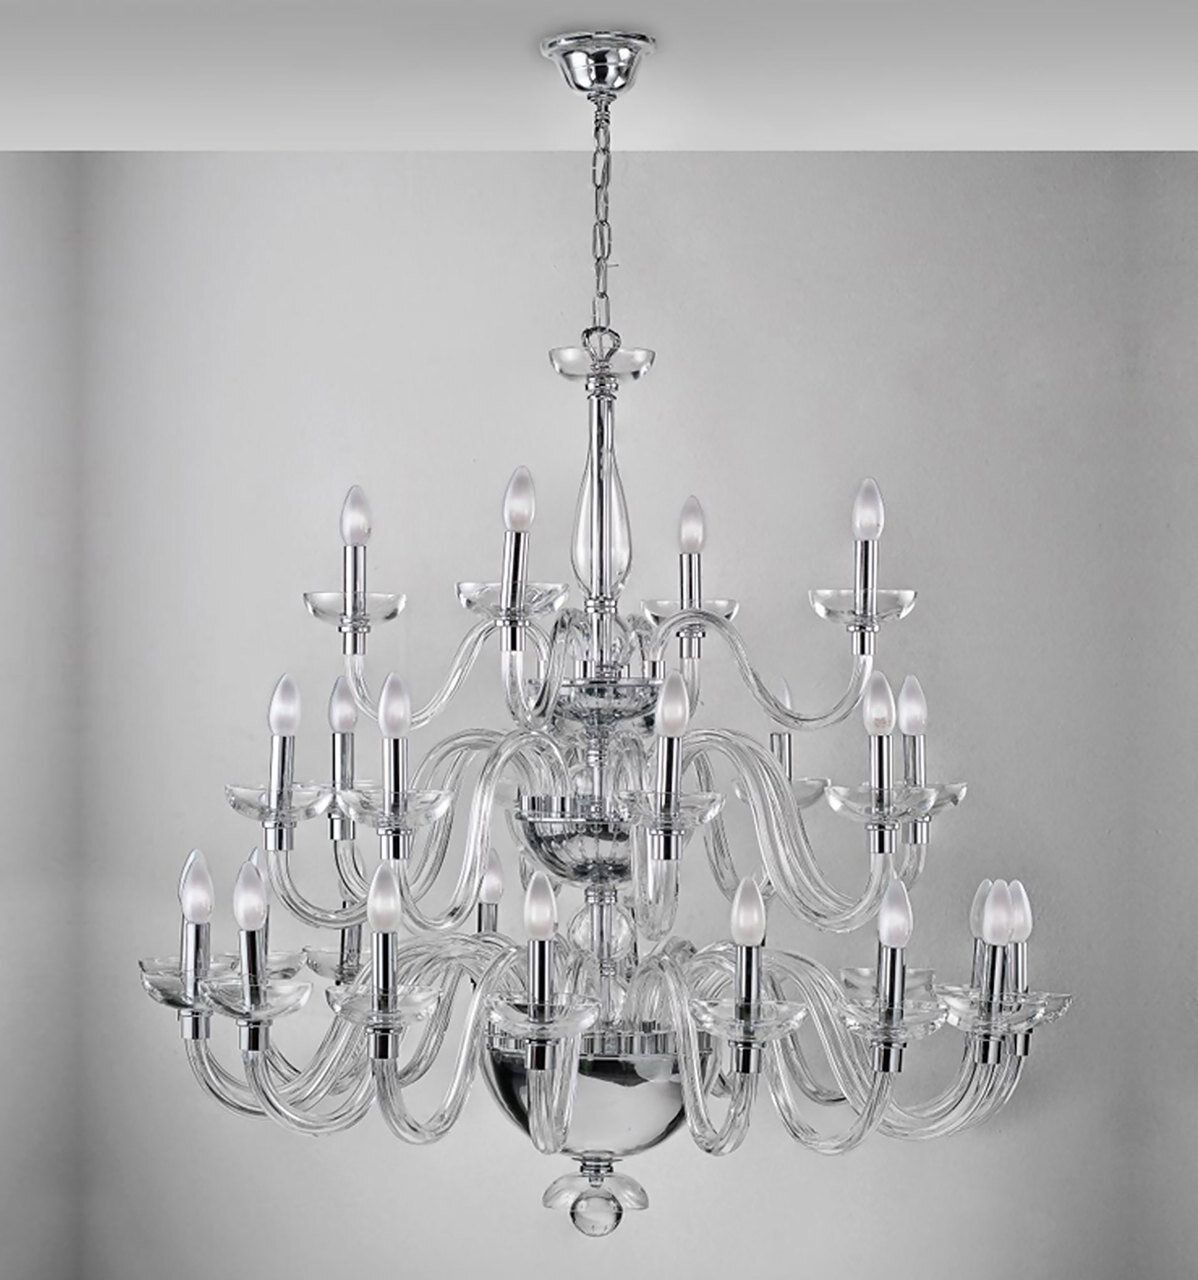 Vista Alegre Diamond Chandelier With 3 Levels And 21 Arms 48000370